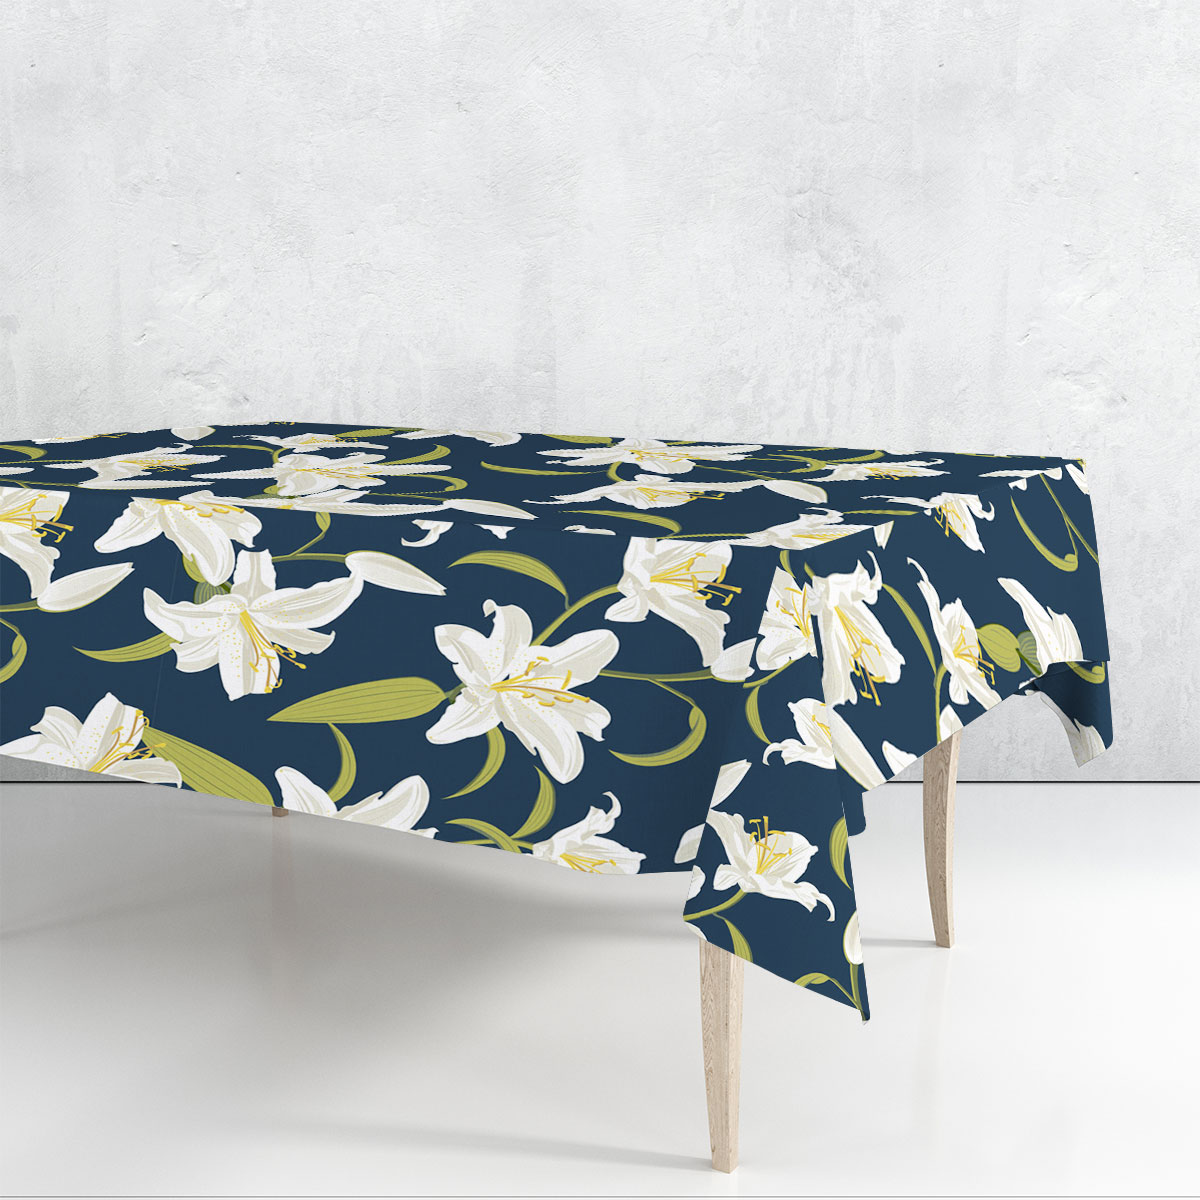 Lily Seamless Pattern On Blue Background Rectangle Tablecloth